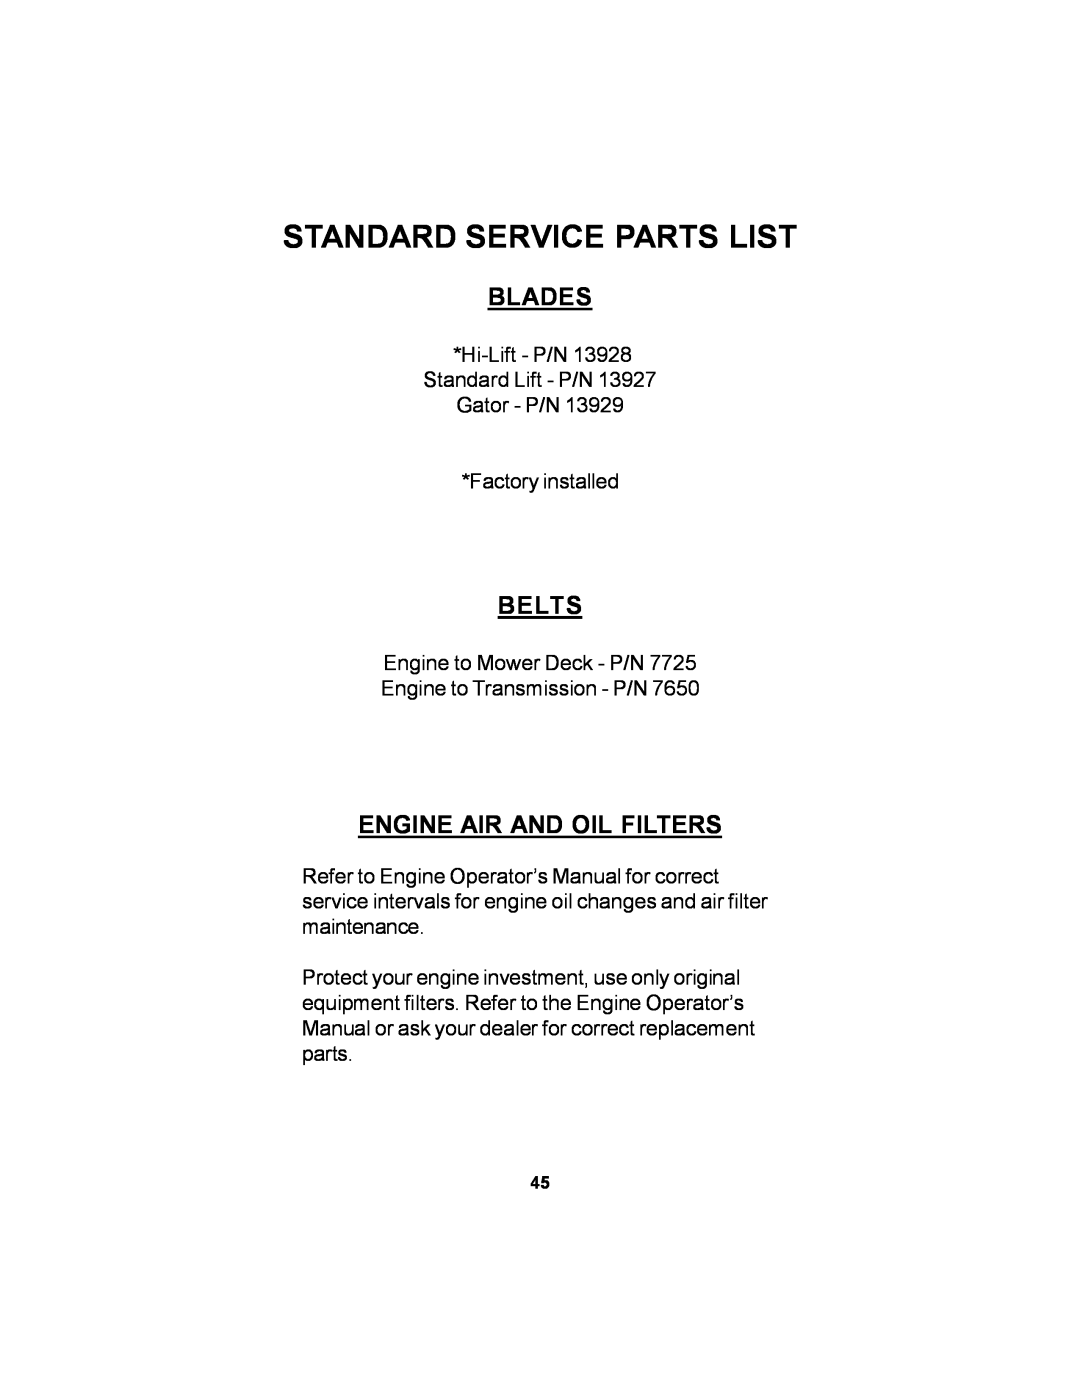 Dixon 14295-1005 manual Standard Service Parts List, Blades, Engine Air And Oil Filters, Belts 